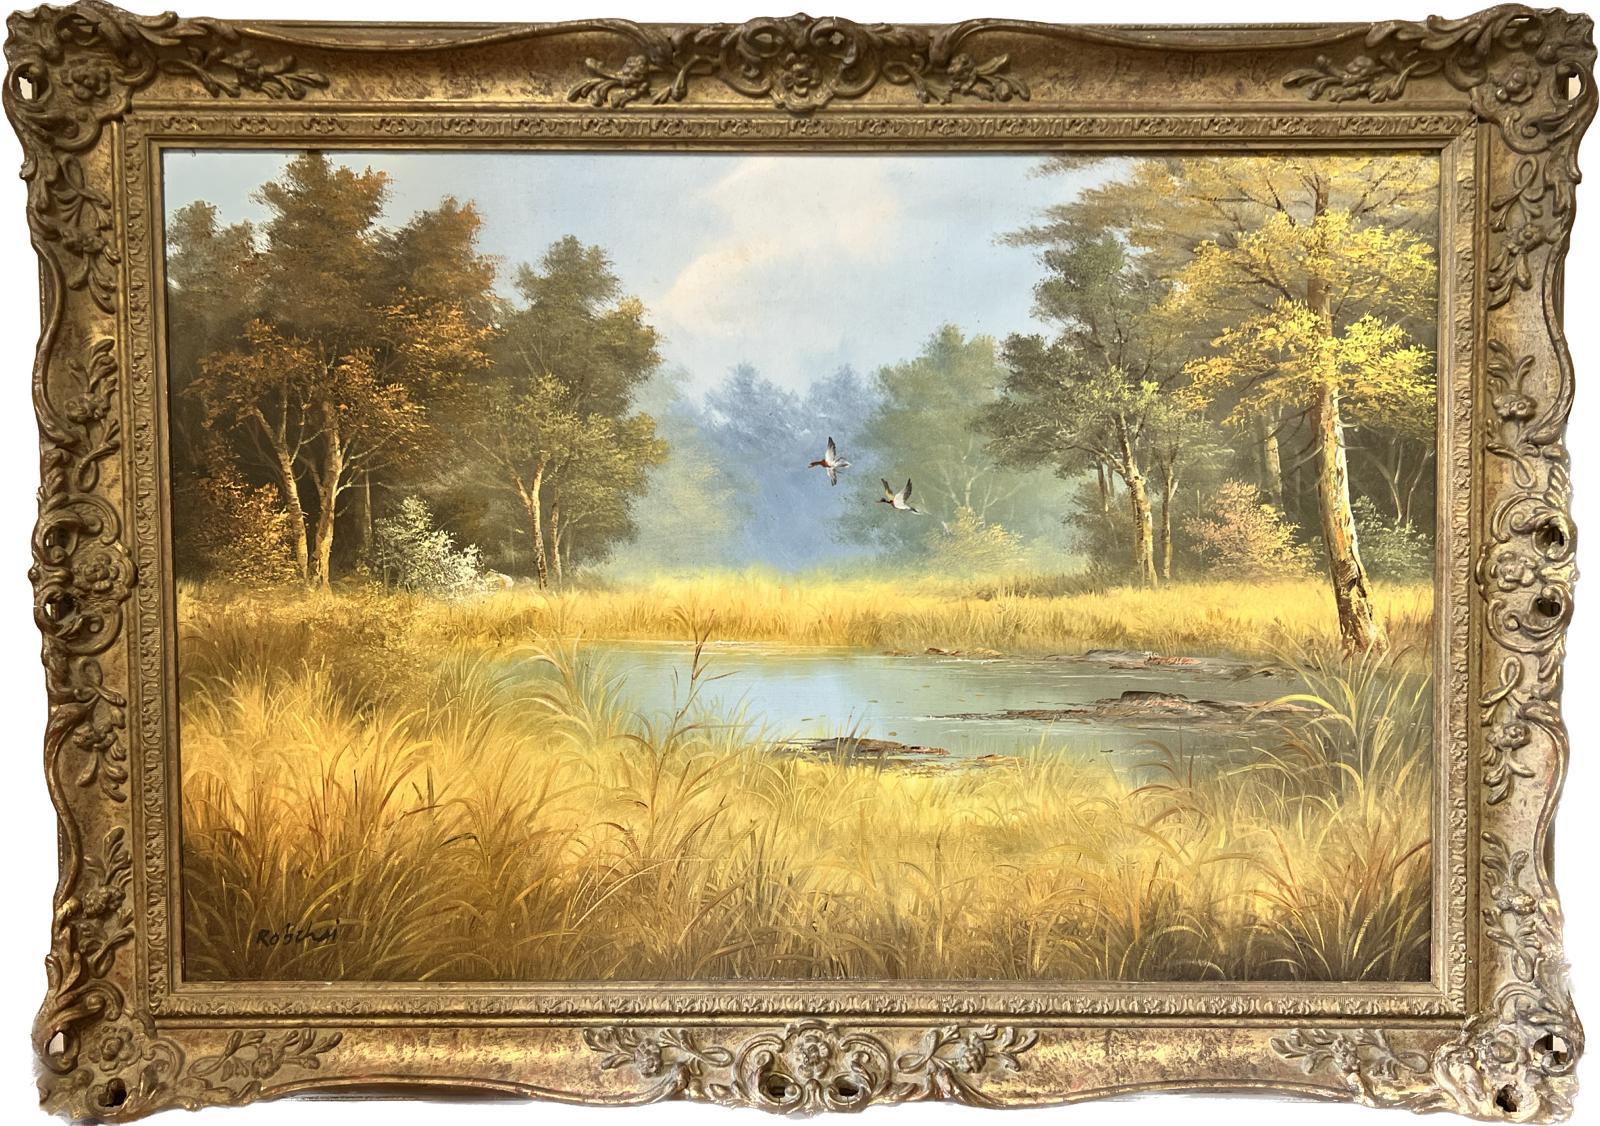 European artist, second half 20th century
signed lower corner
oil on canvas, framed
framed: 25 x 35 inches
canvas: 20 x 30 inches
provenance: private collection, England
condition: very good and sound condition 
